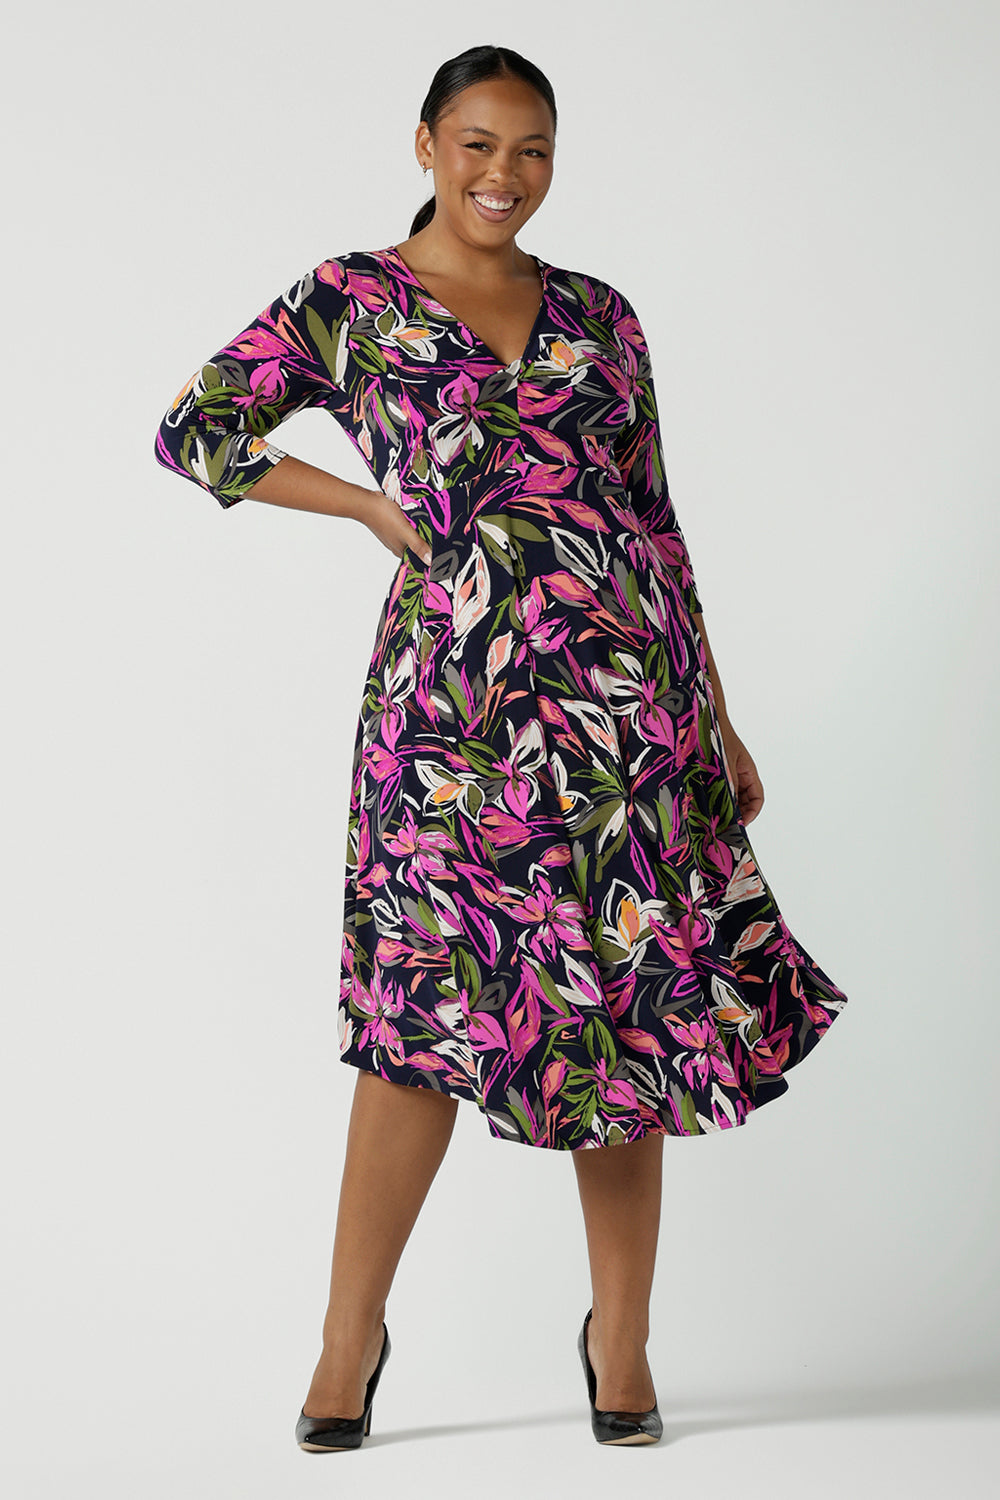 A size 16 woman wears a Kyra dress in Vivid Flora. Empire line fit and flare style with a 3/4 sleeve. Twist front neckline. Flattering shape for all sizes 8 - 24. Made in Australia for corporate casual women. 